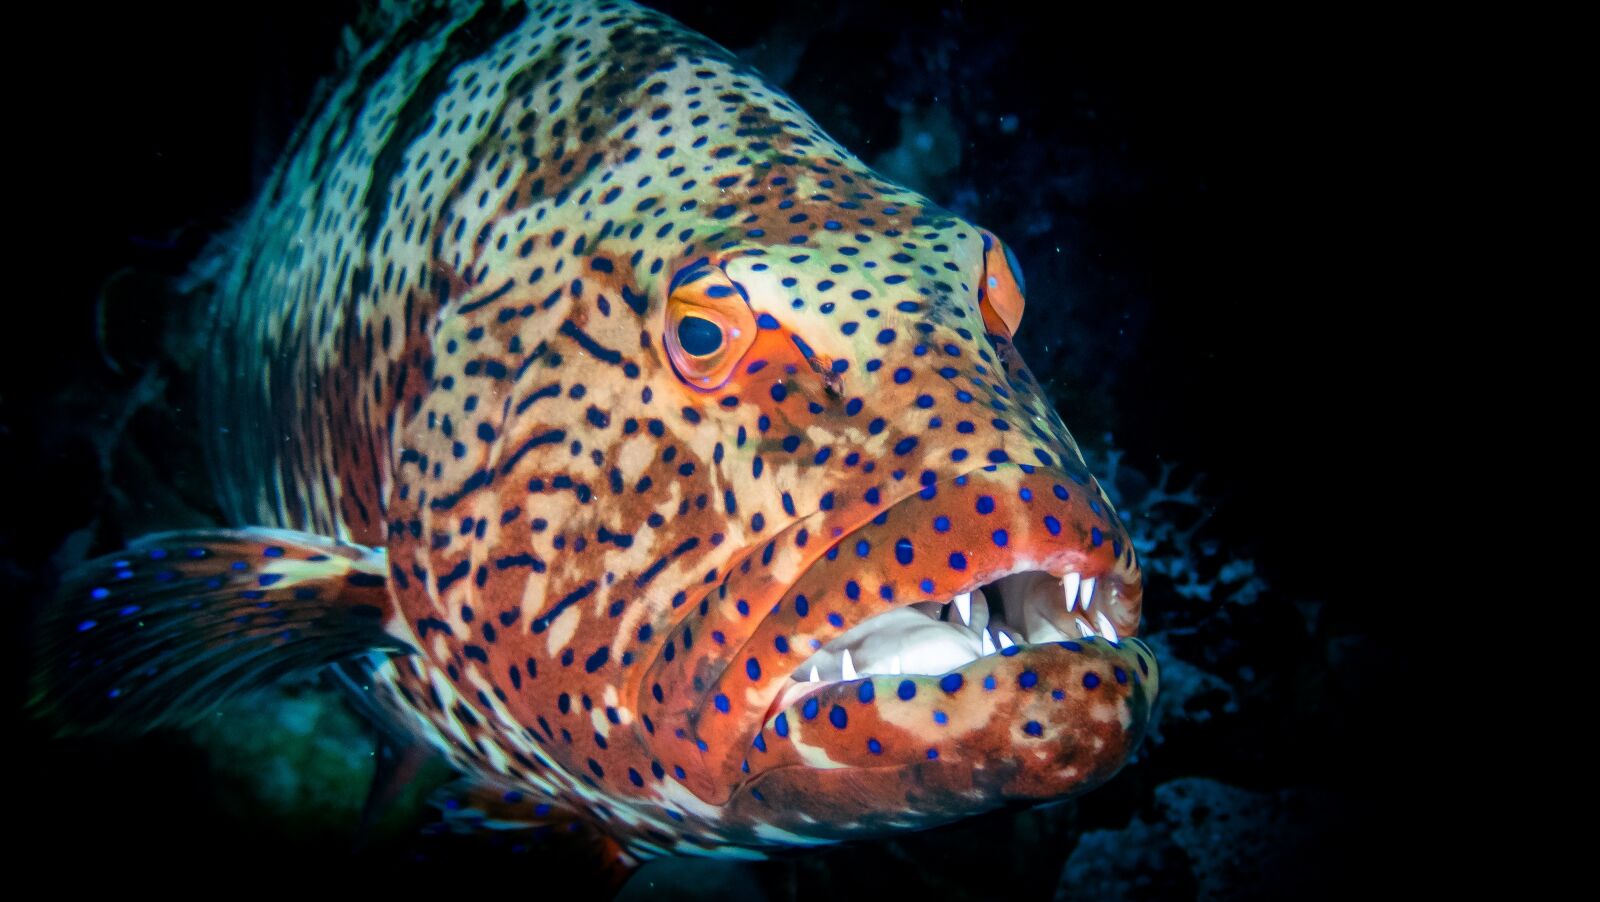 Olympus TG-6 sample photo. Grouper, egypt, diving photography